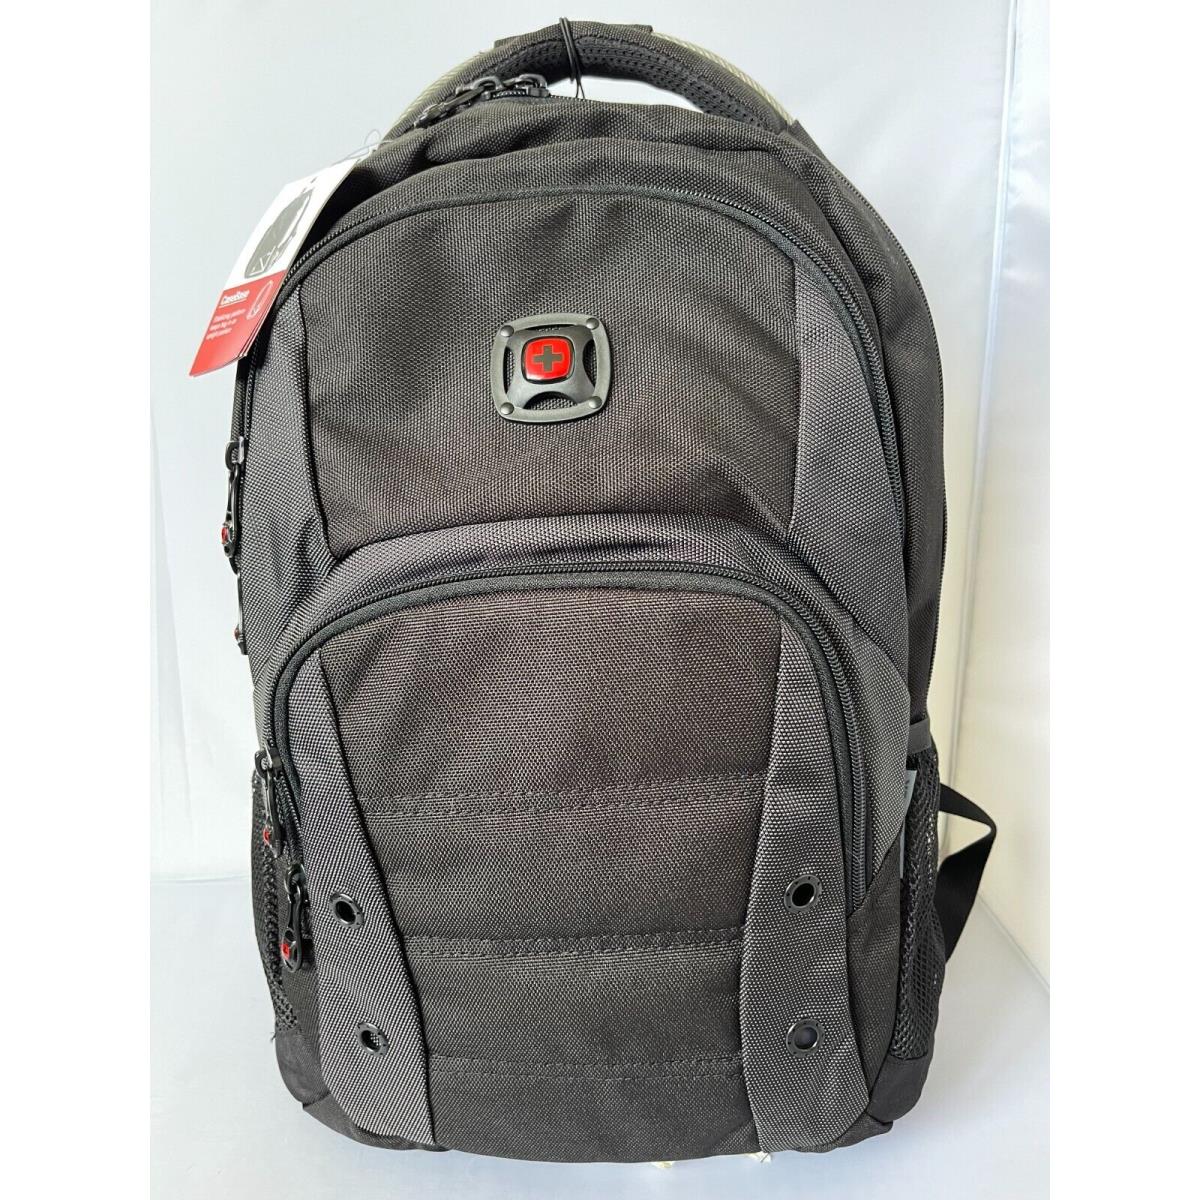 Wenger Forge Pro 16`` Laptop Black Gray School Backpack 13.4 Wx18.5 Hx10.6 D